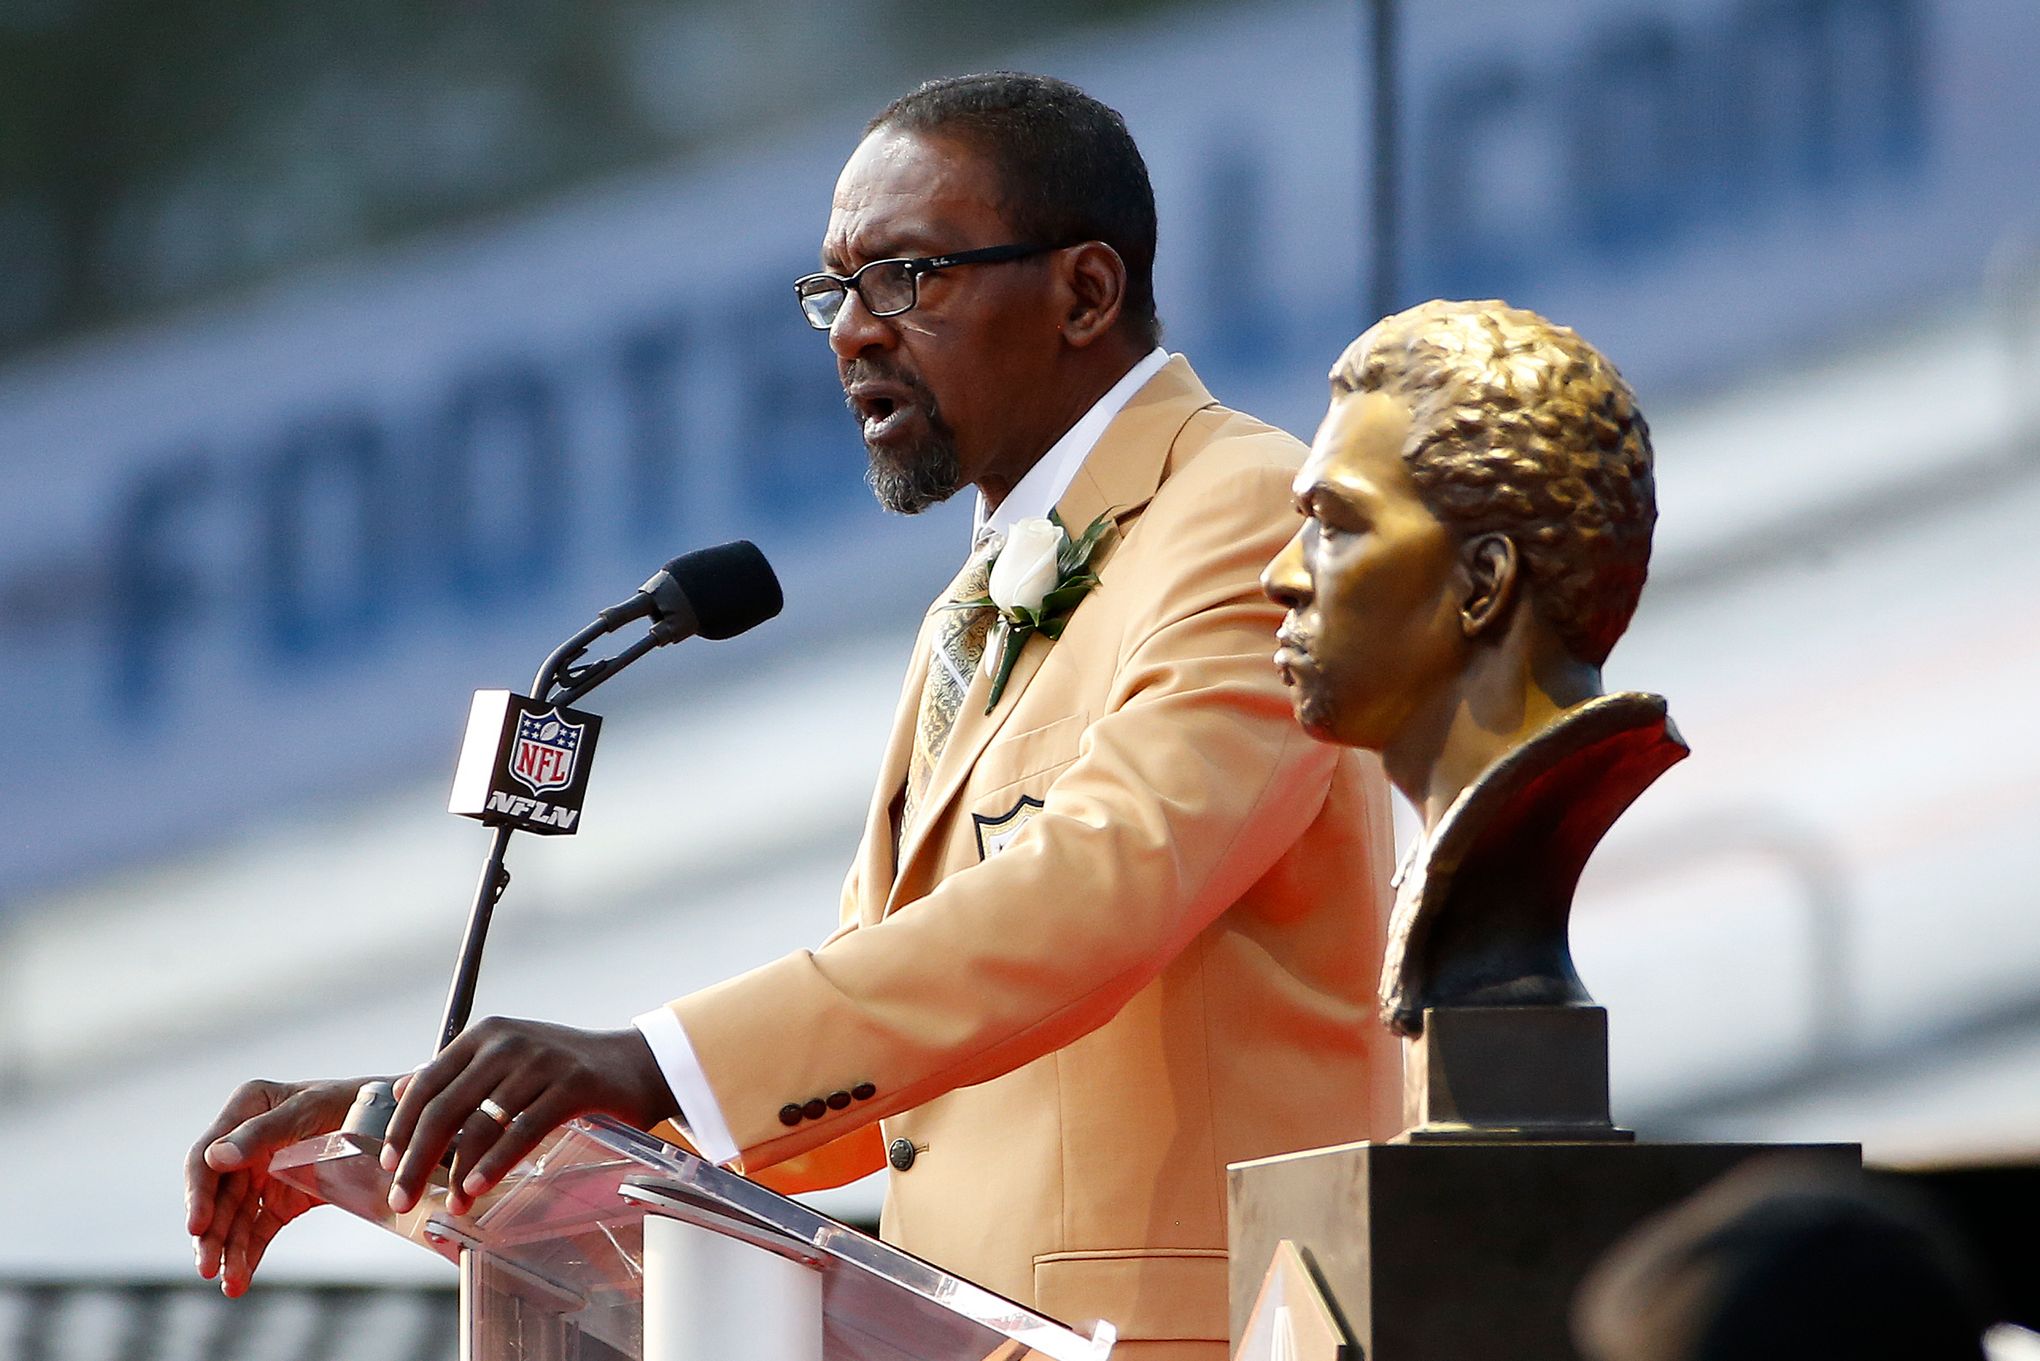 Seahawks to retire Kenny Easley's jersey number 45 on Sunday